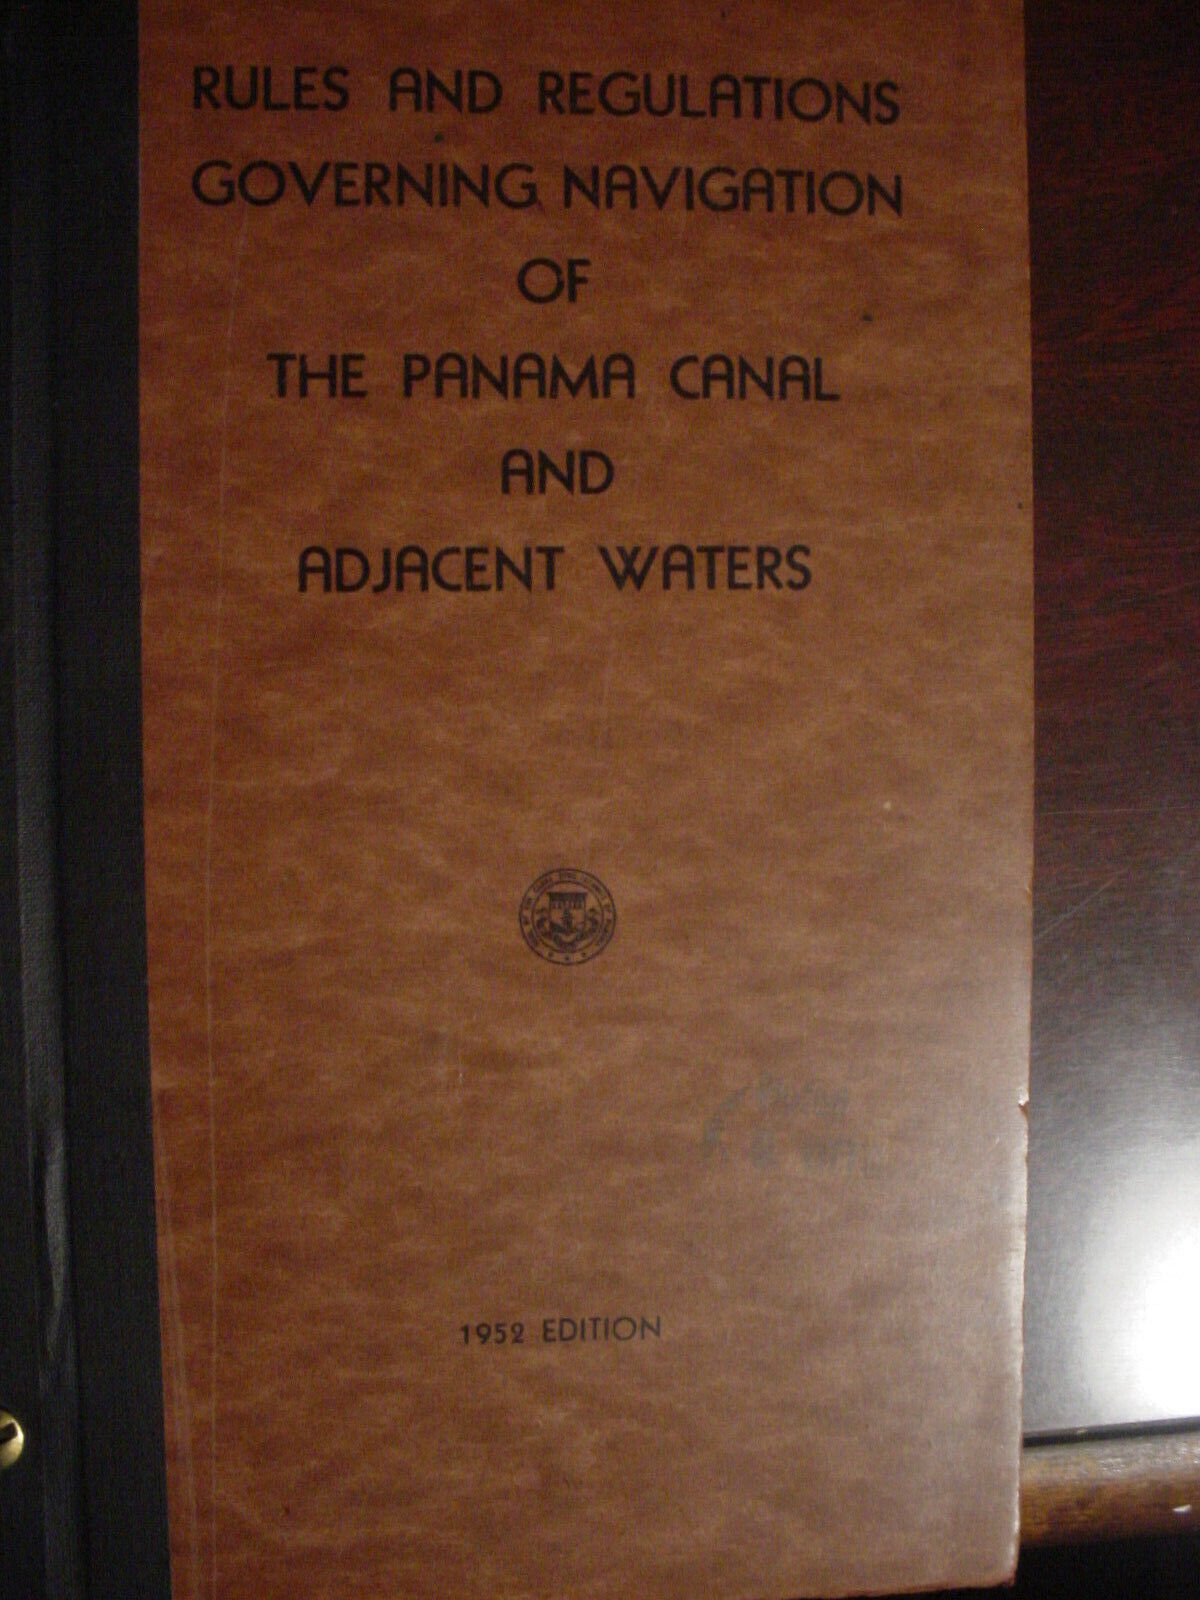 Rules Regulations Governing Navigation of Panama Canal & Adjacent Waters 1952 Ed